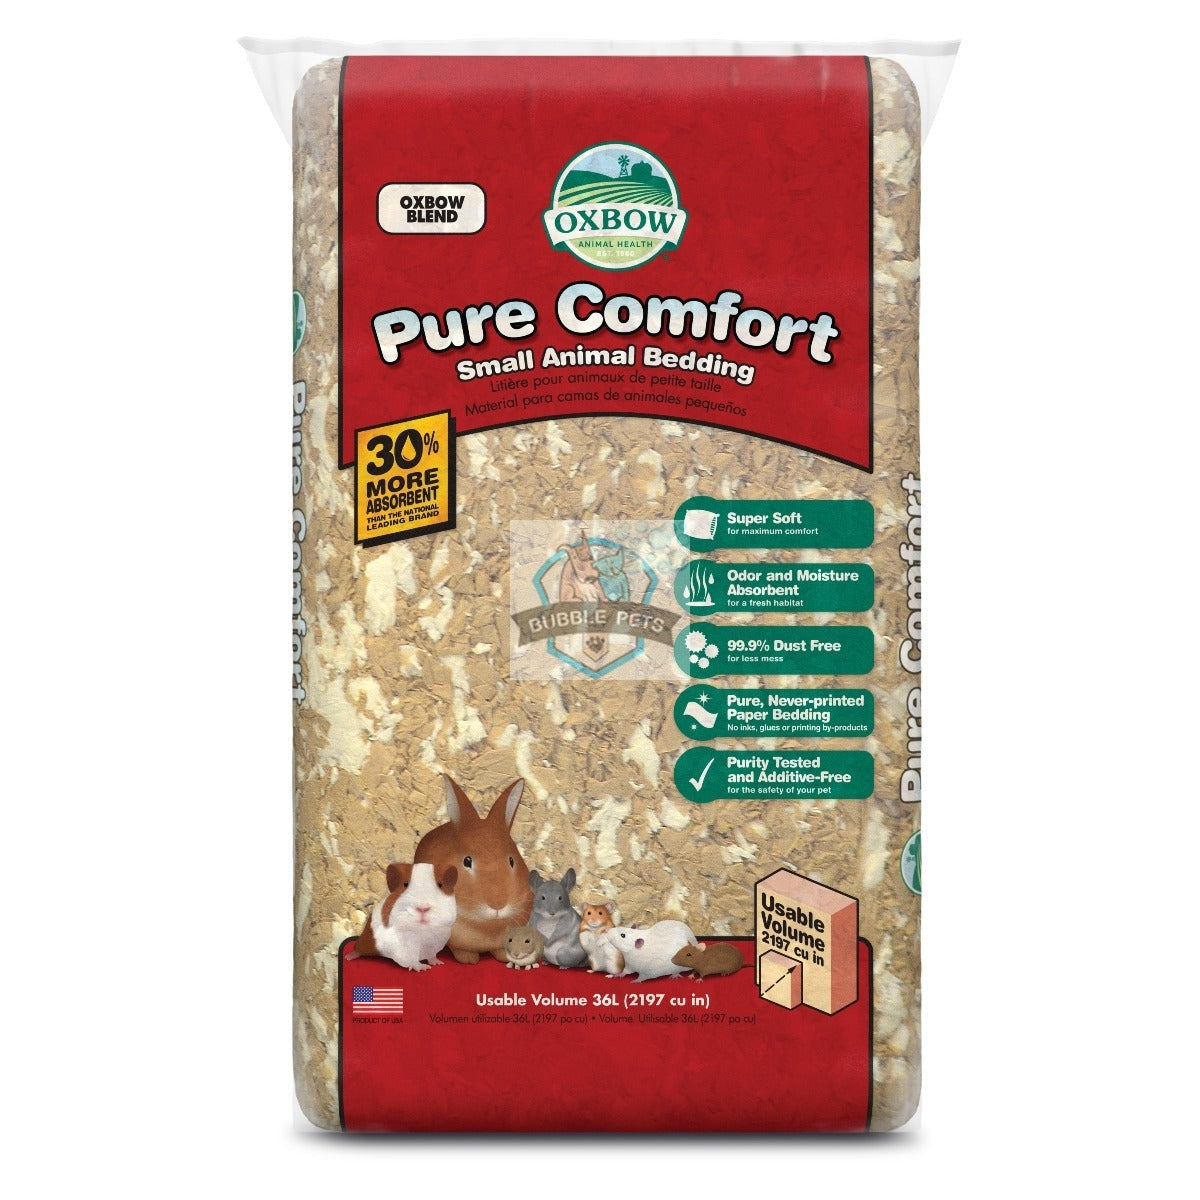 Oxbow Pure Comfort Blend Small Animal Bedding